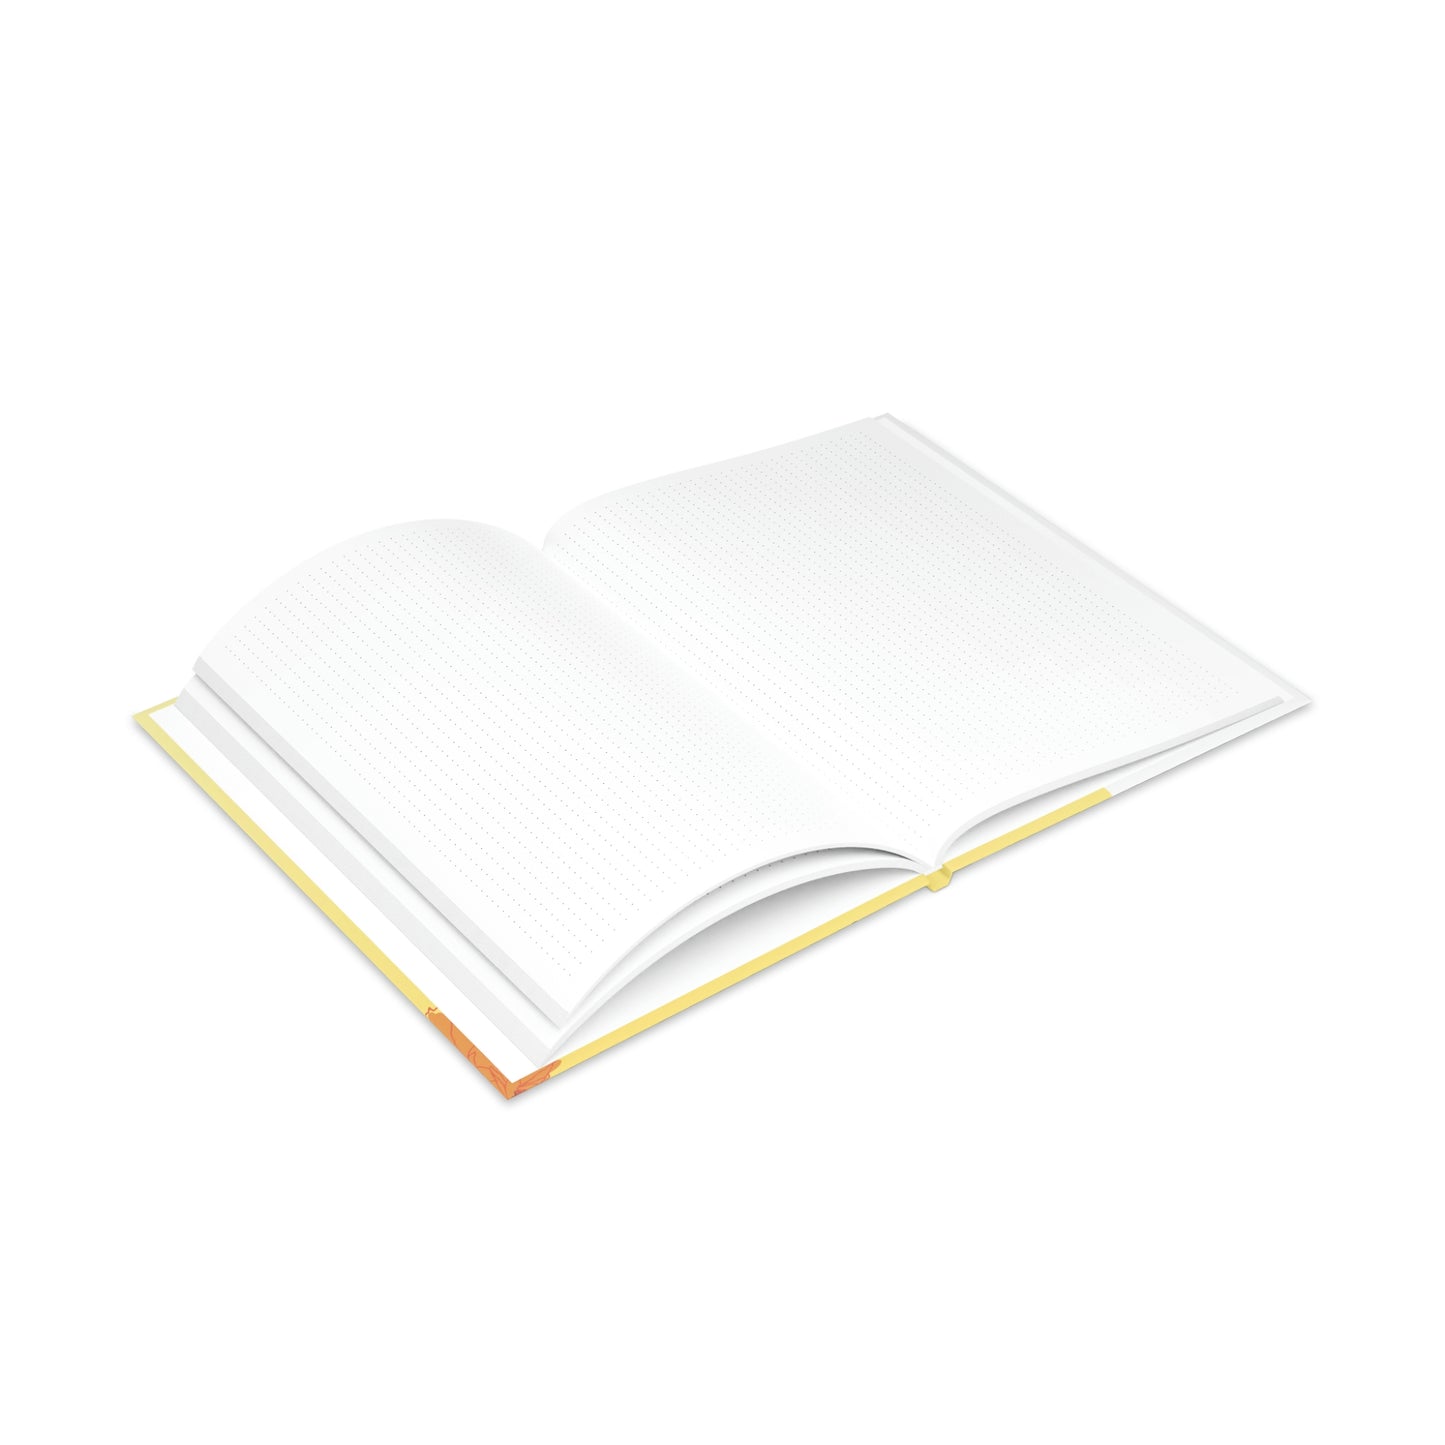 Smile - Hardcover Notebook with Puffy Covers